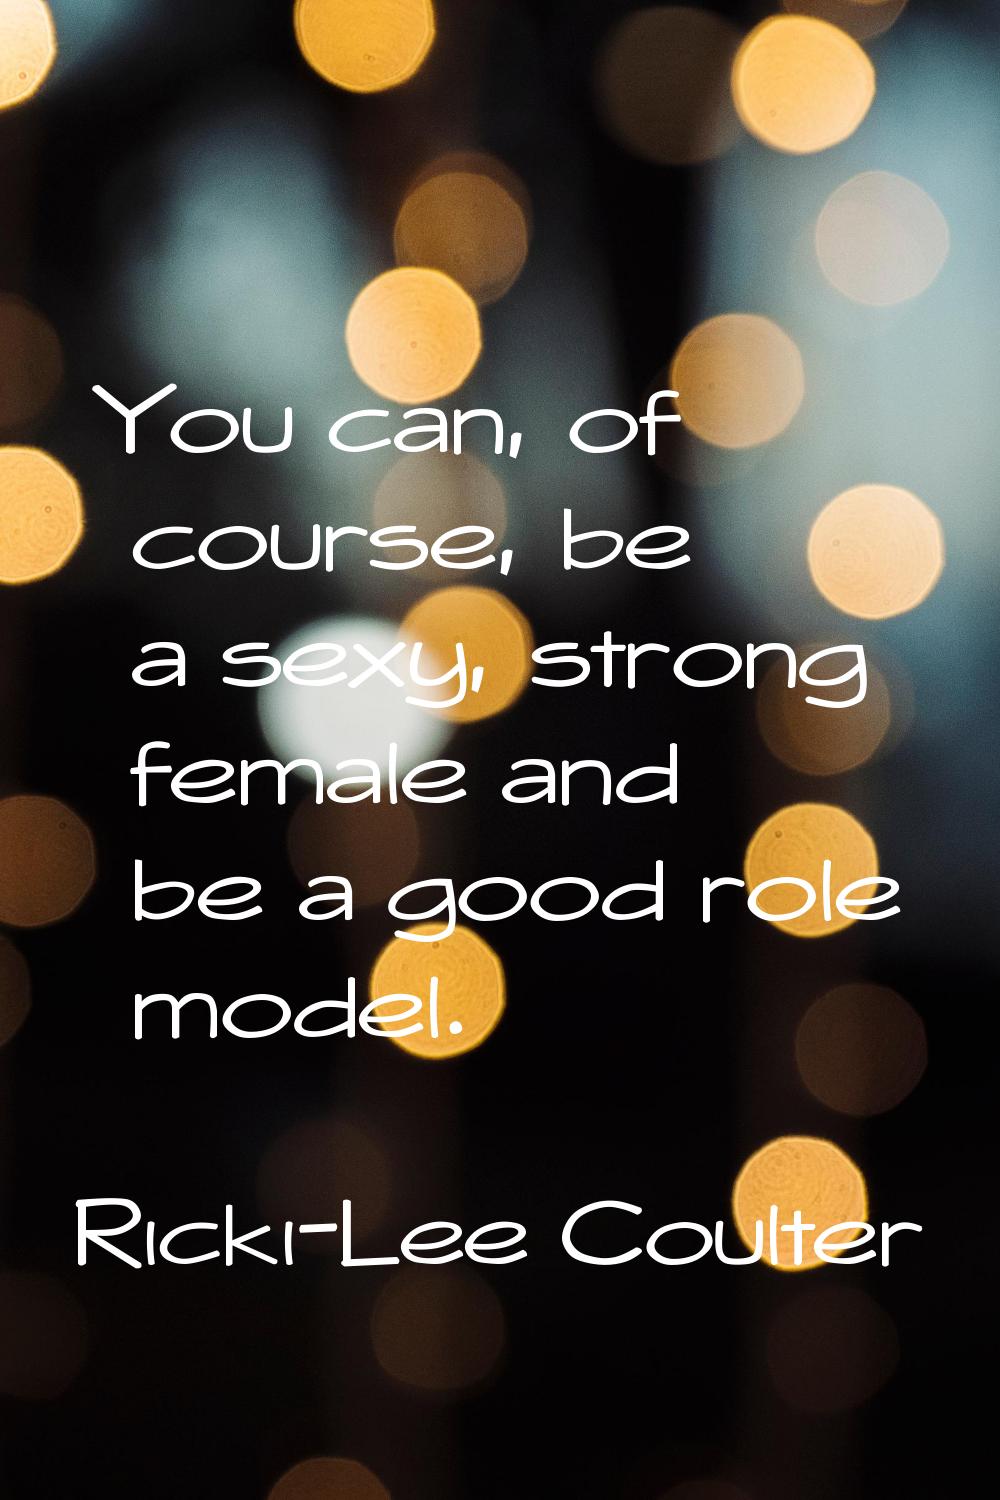 You can, of course, be a sexy, strong female and be a good role model.